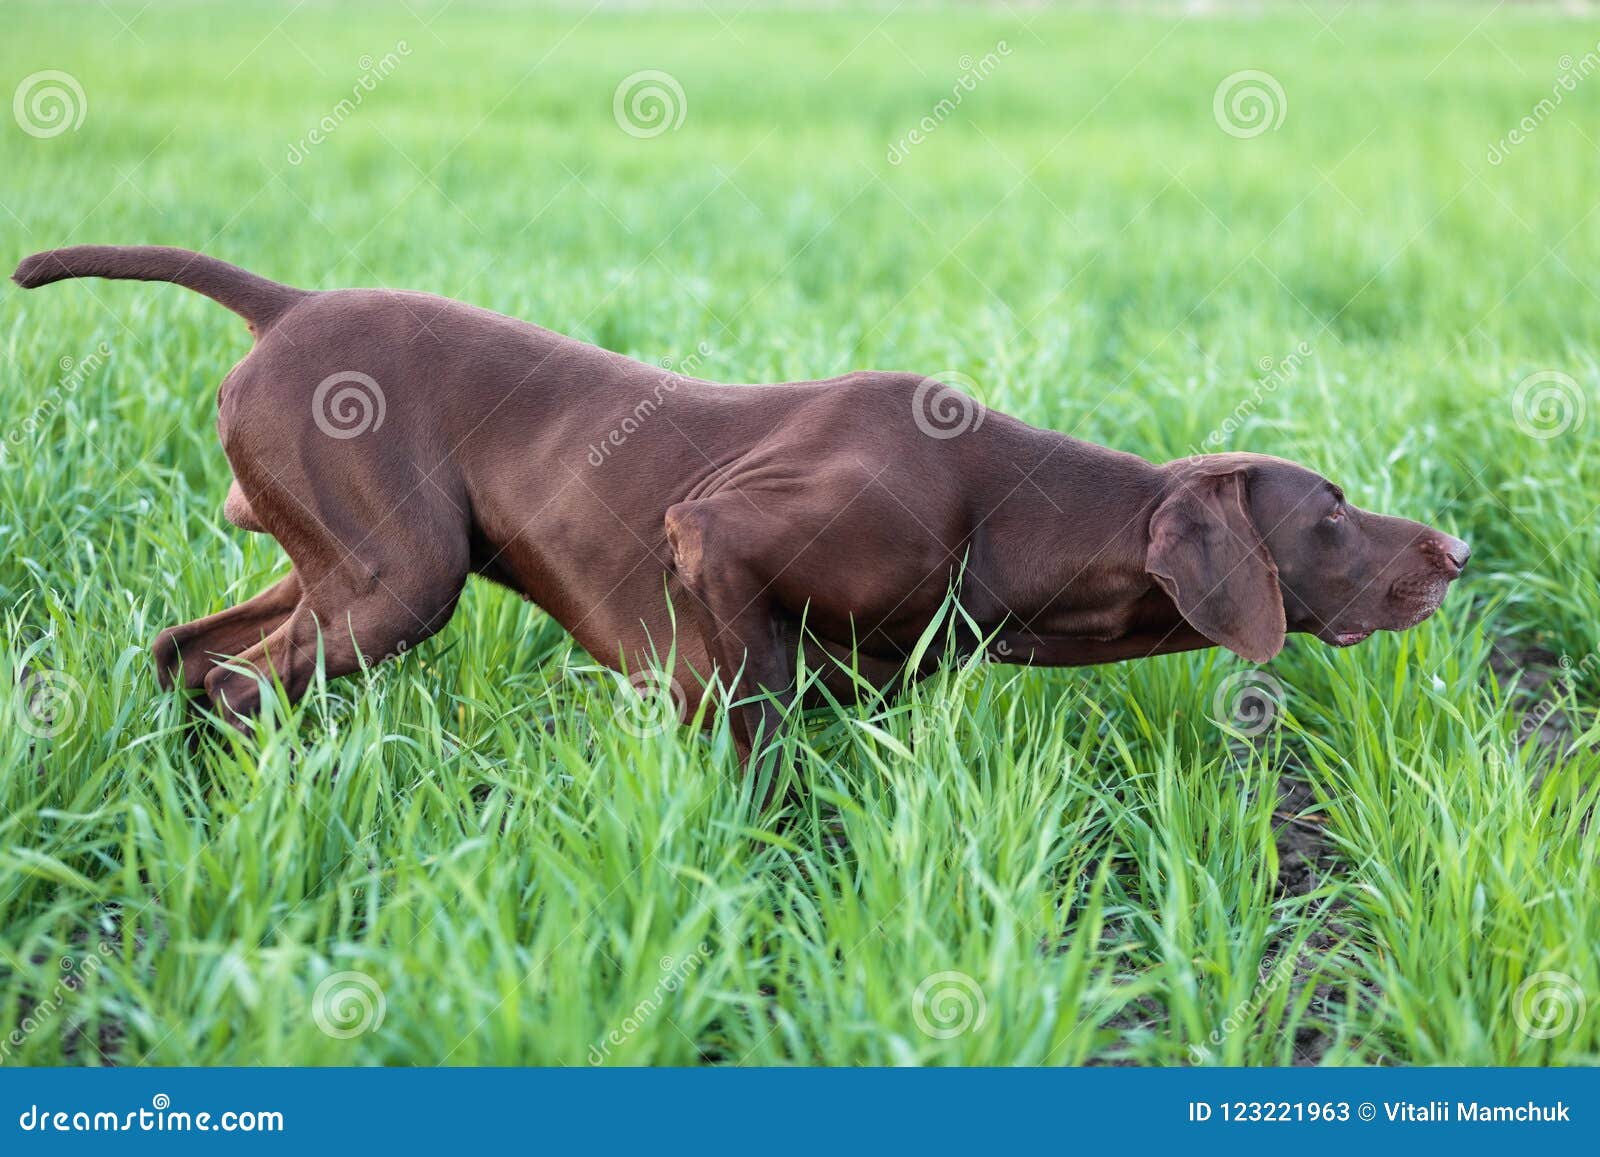 A Muscular Chocolate Brown Hound German Shorthaired Pointer A Thoroughbred Stands Among The Fields In The Grass In The Point Stock Image Image Of Animal Landscape 123221963